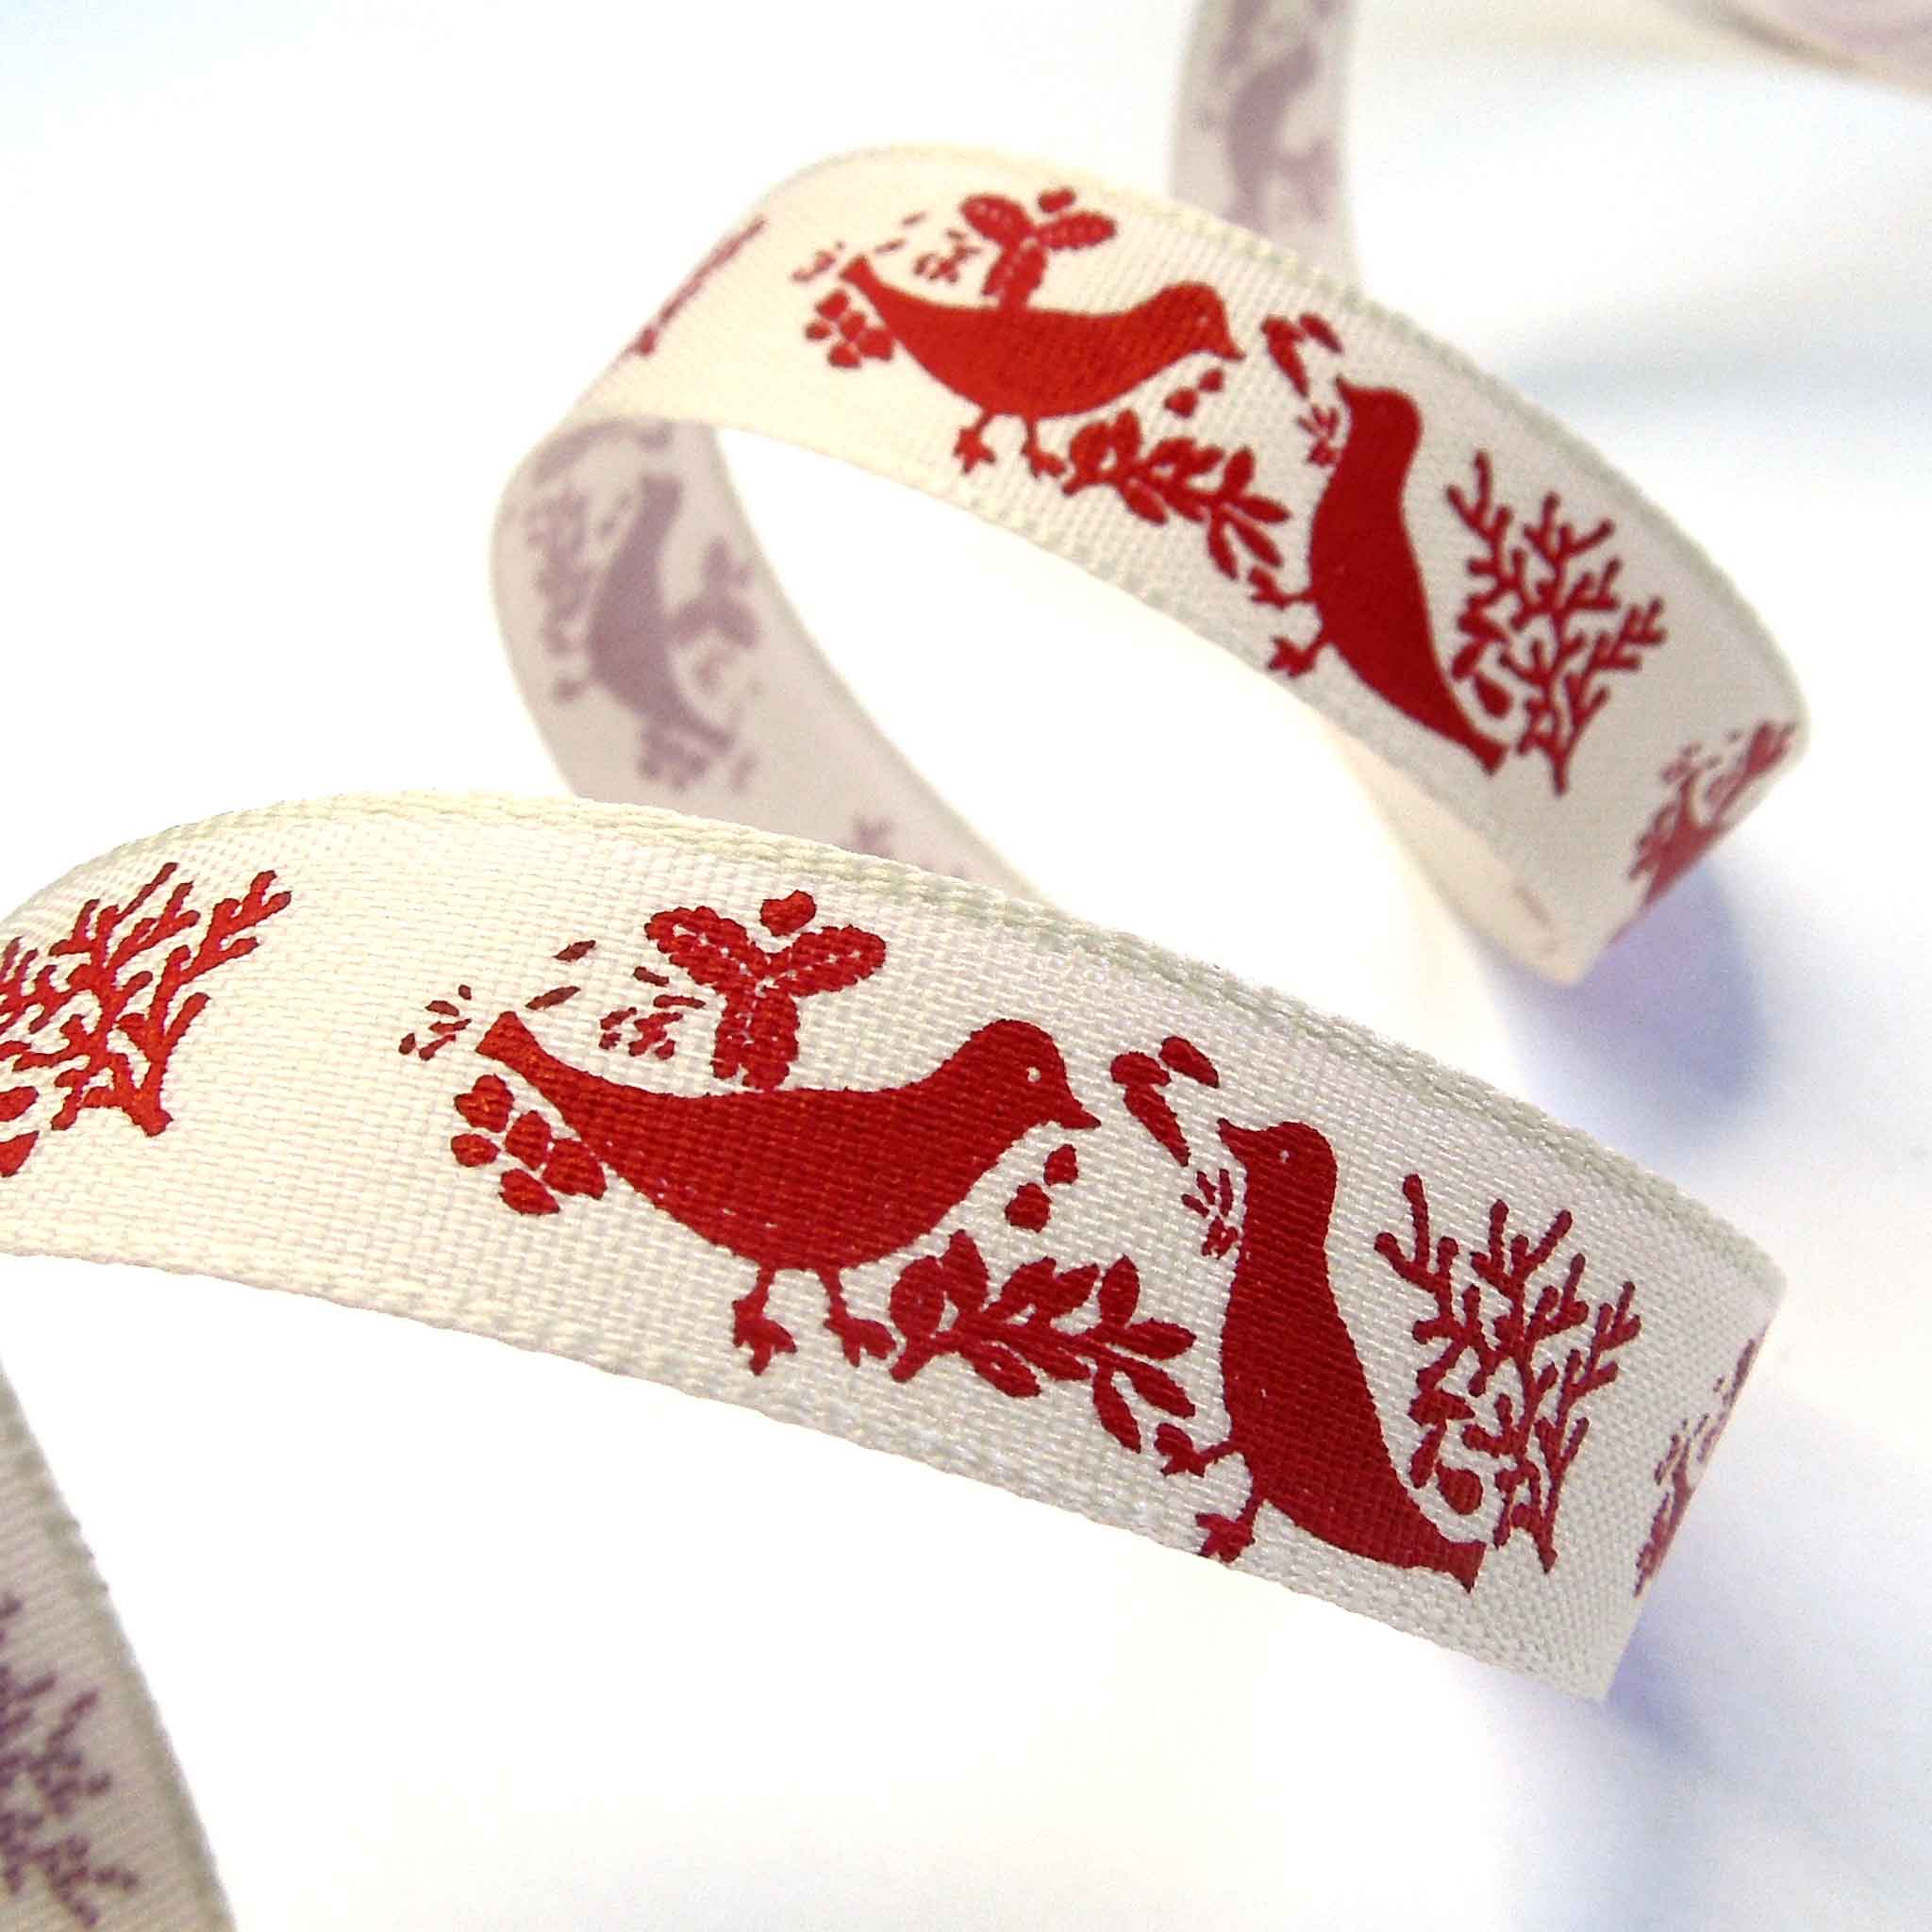 15mm Turtle Dove Red Ribbon by Berisfords